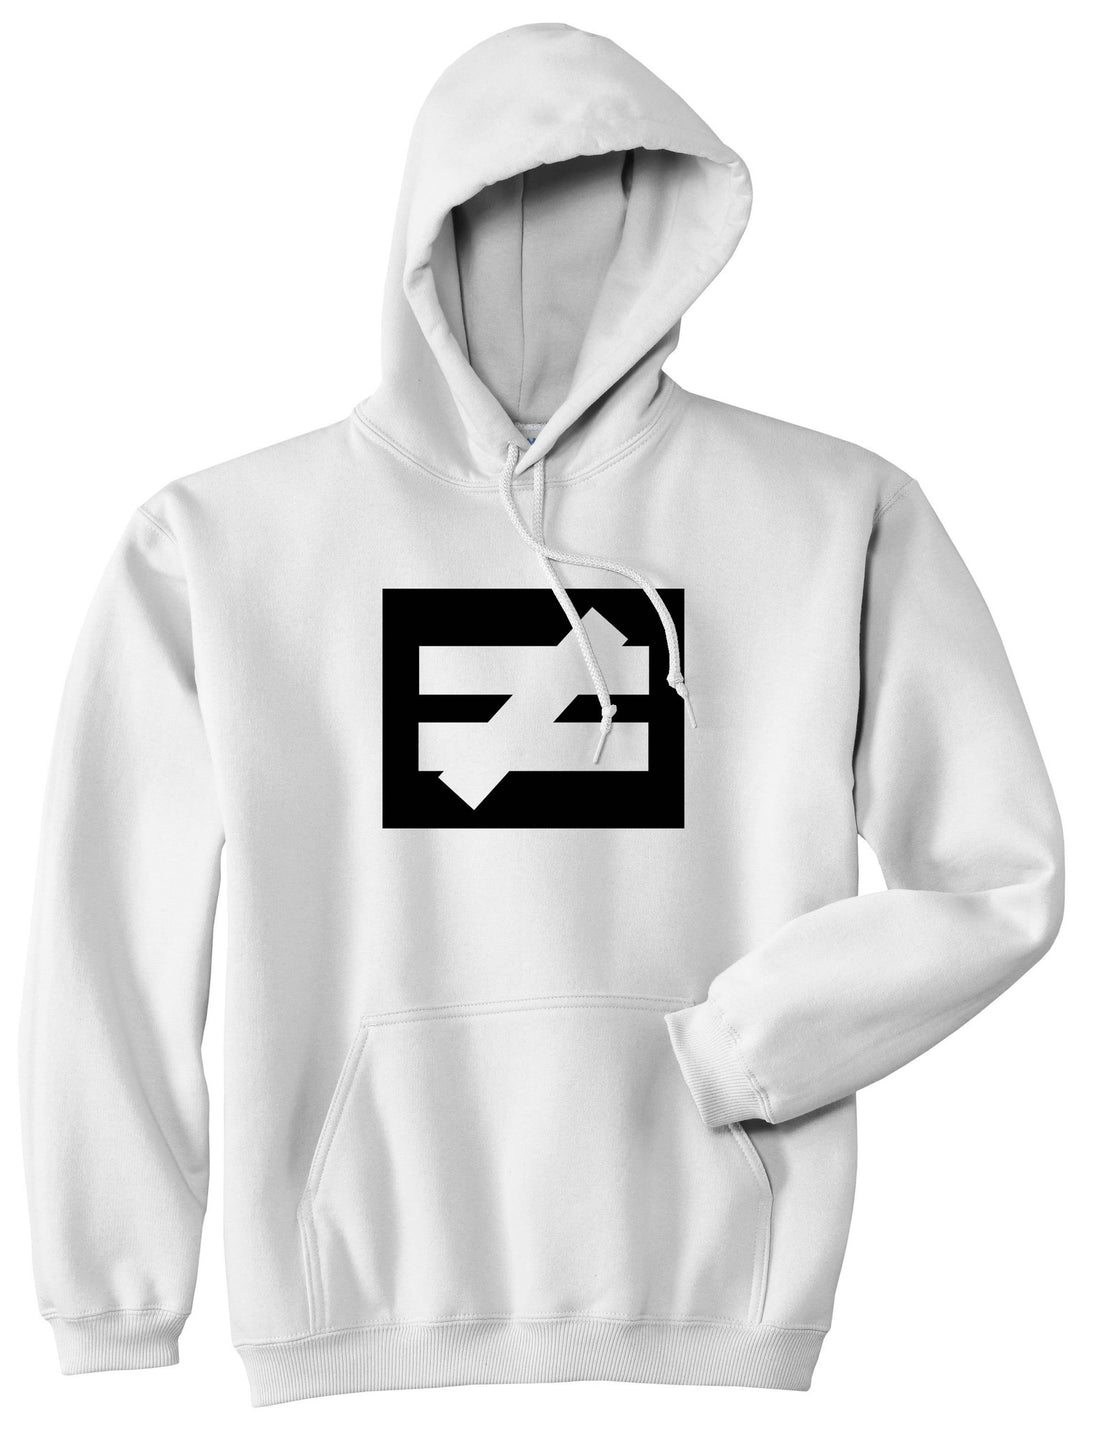 No Equal No Competition Pullover Hoodie Hoody in White by Kings Of NY